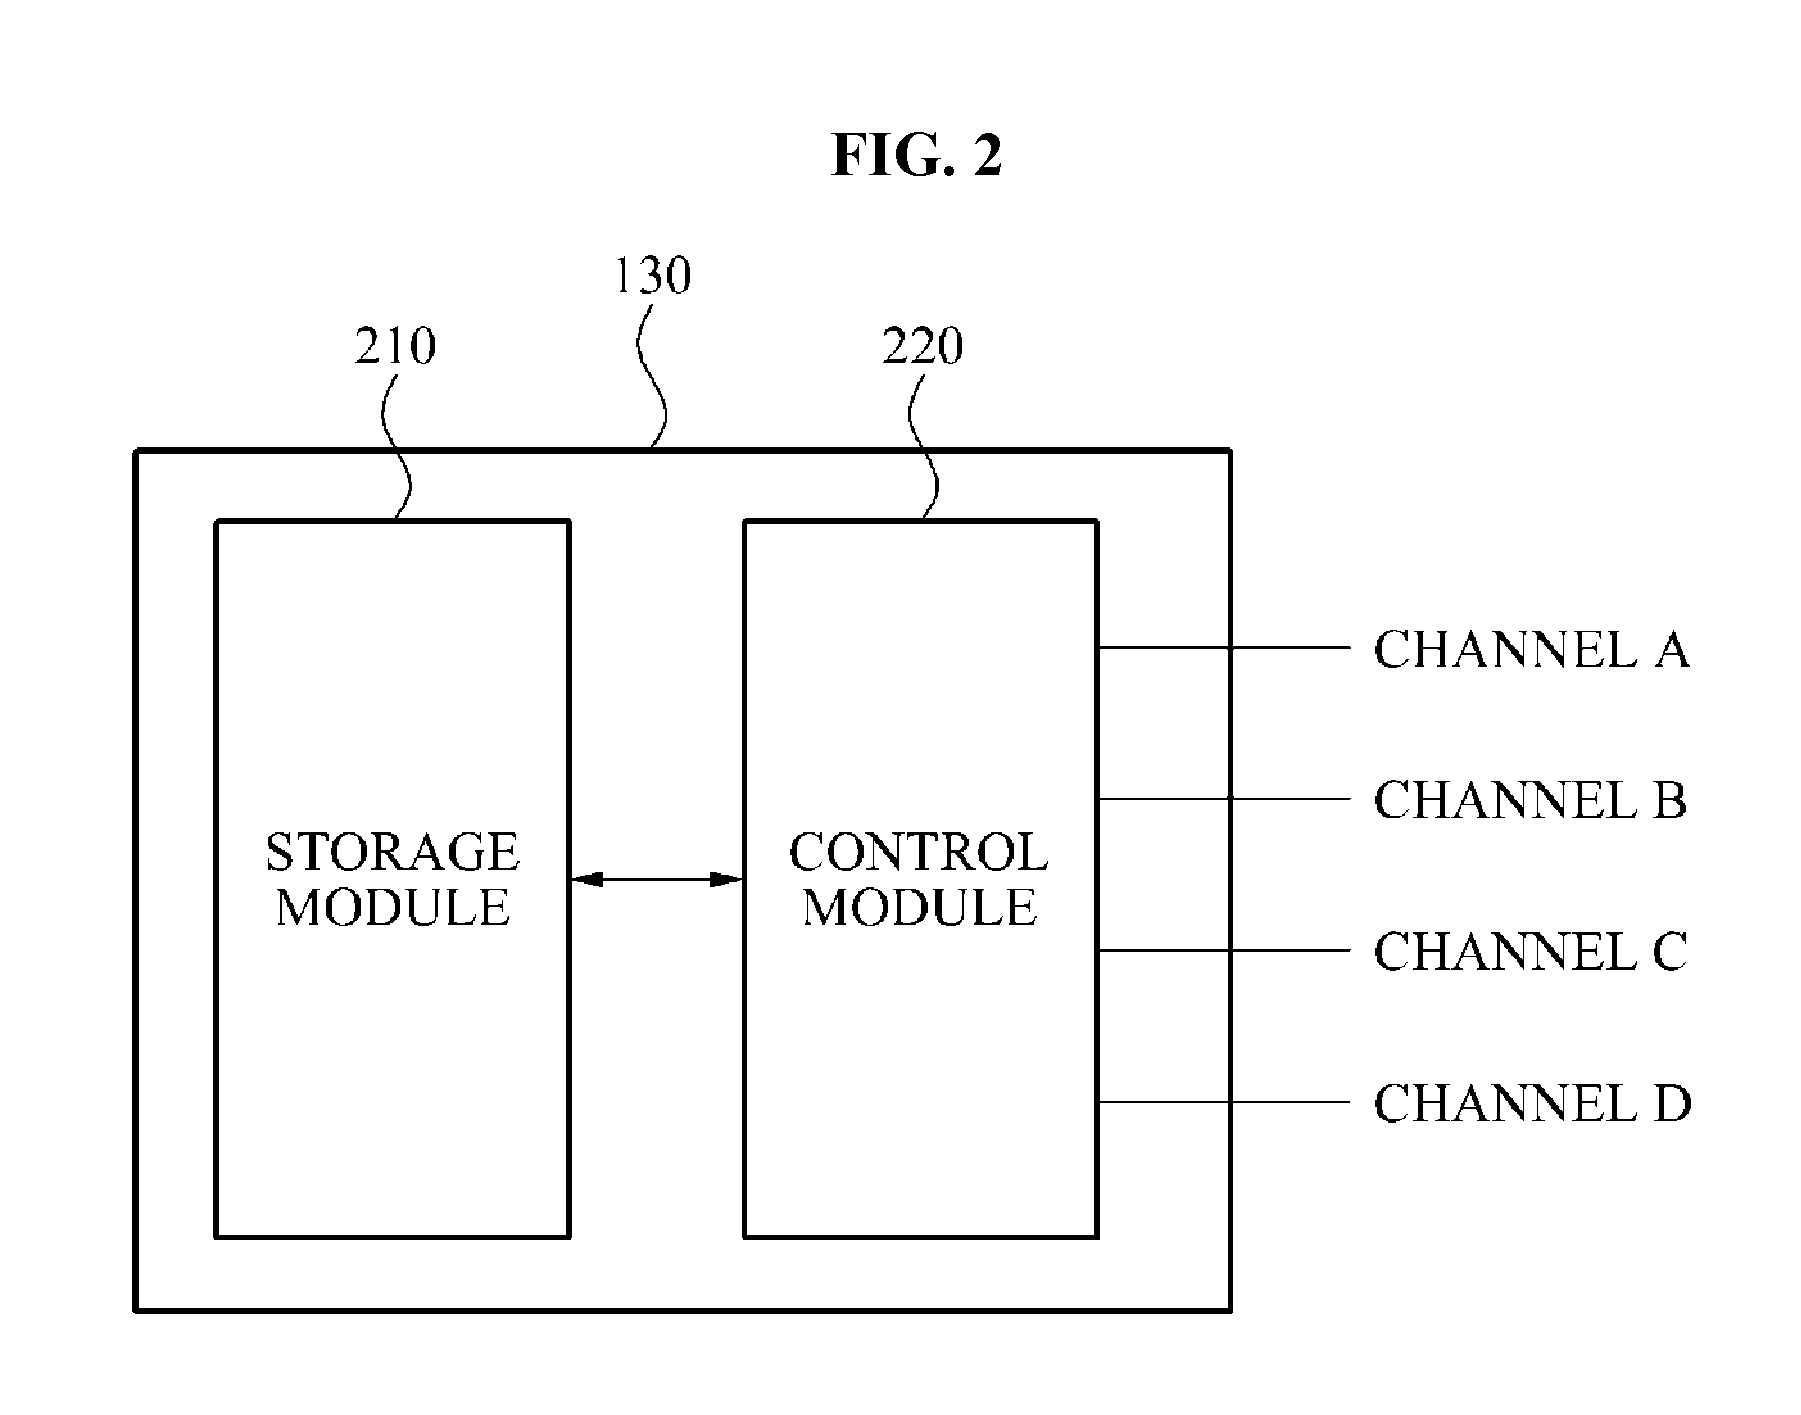 Controller for solid state disk which controls access to memory bank